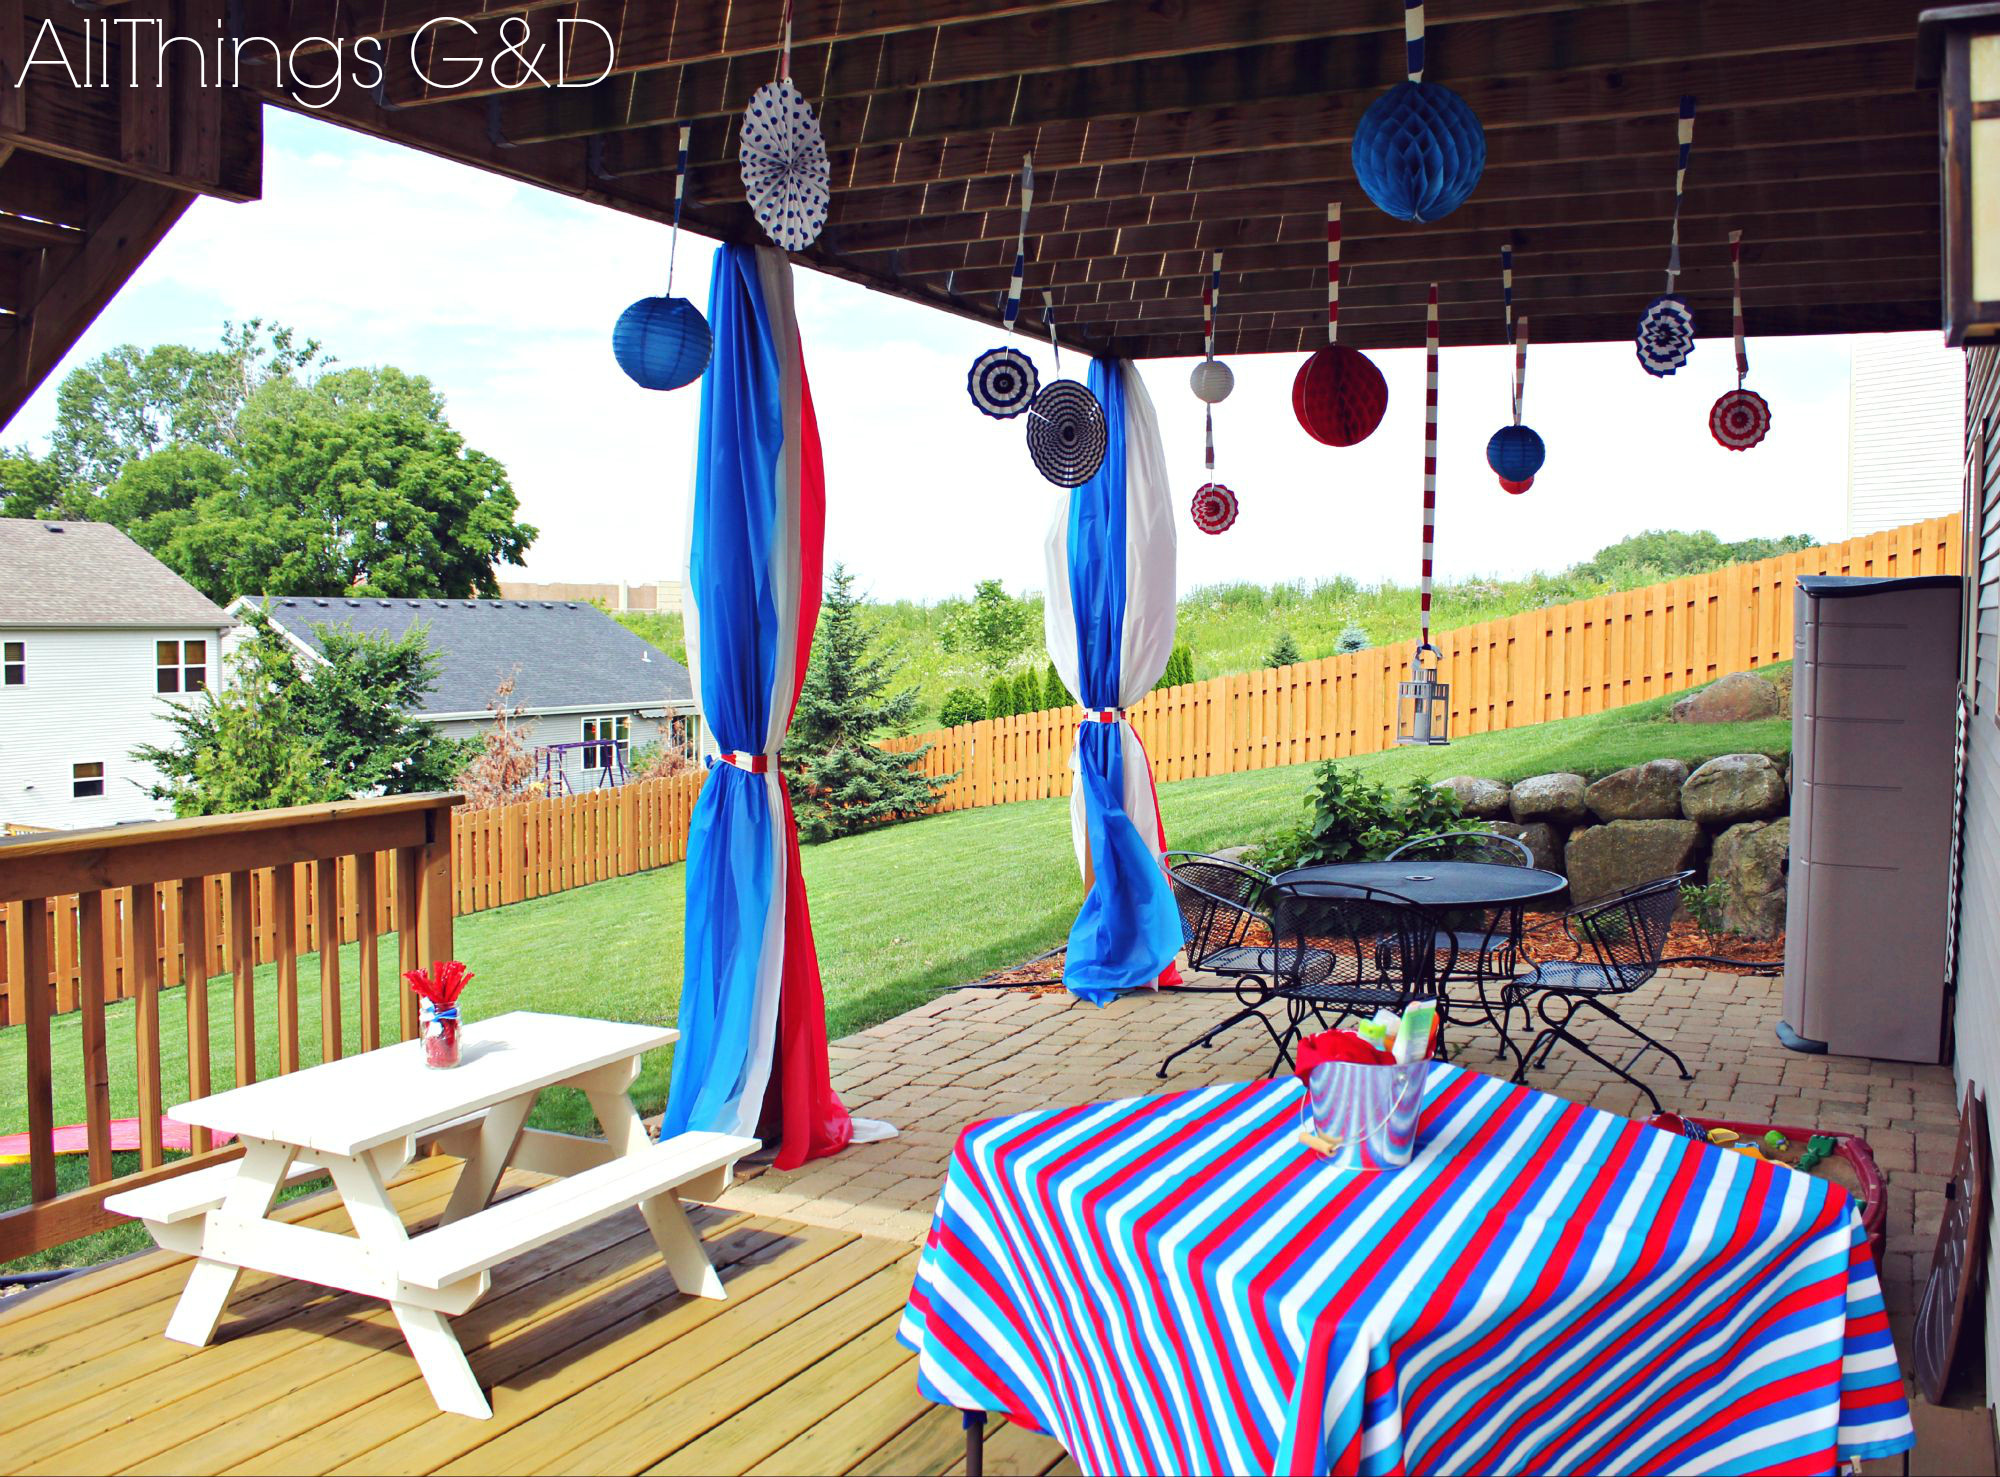 4Th Of July Backyard Party Ideas
 Our 8th Annual 4th of July Party All Things G&D